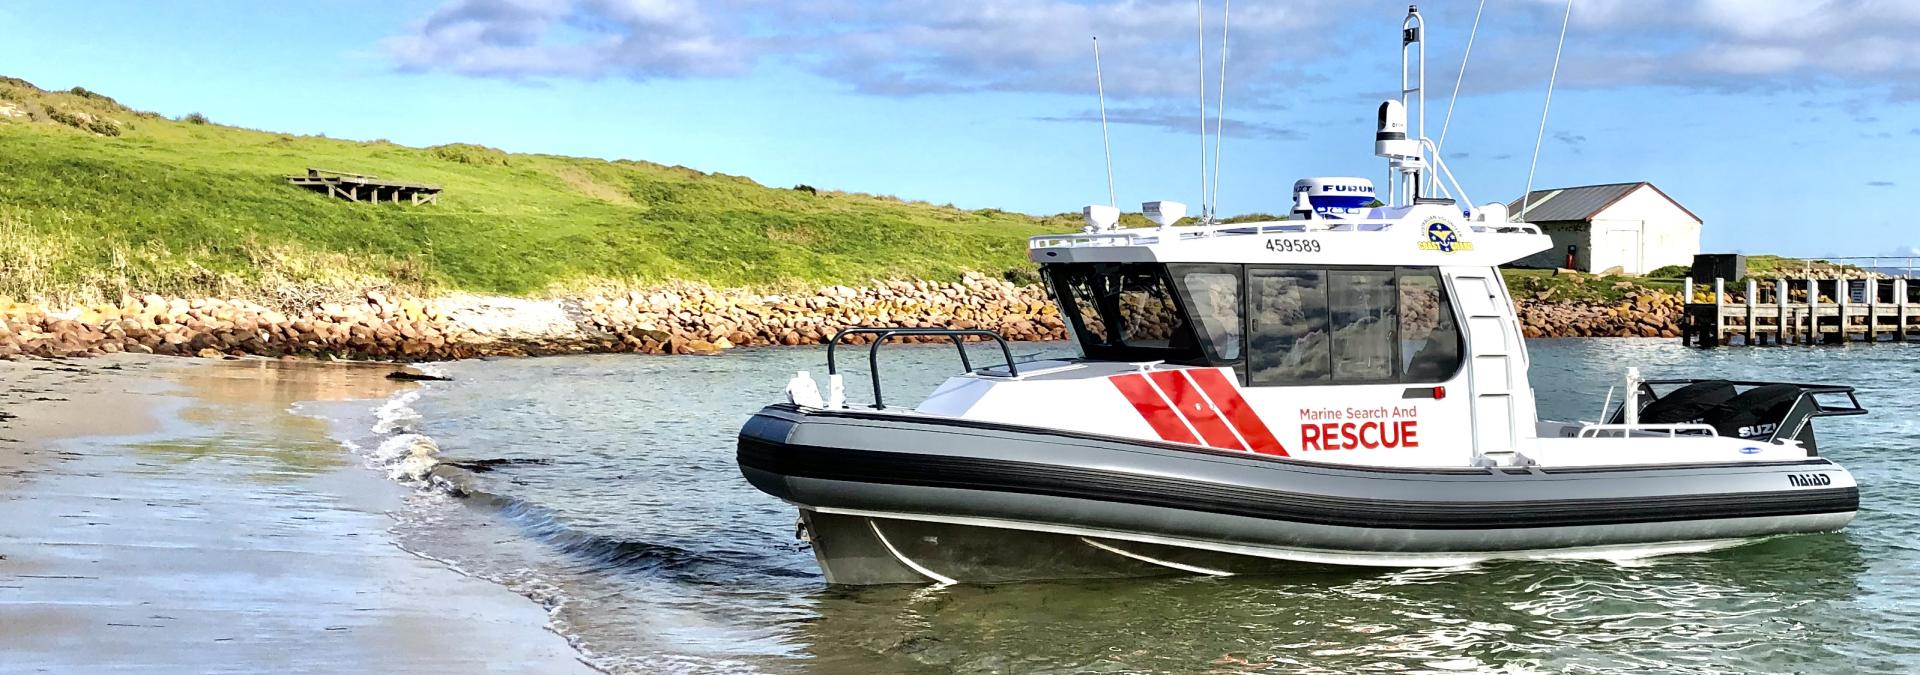 A Marine Search and Rescue vessel by the beach in Mallacoota